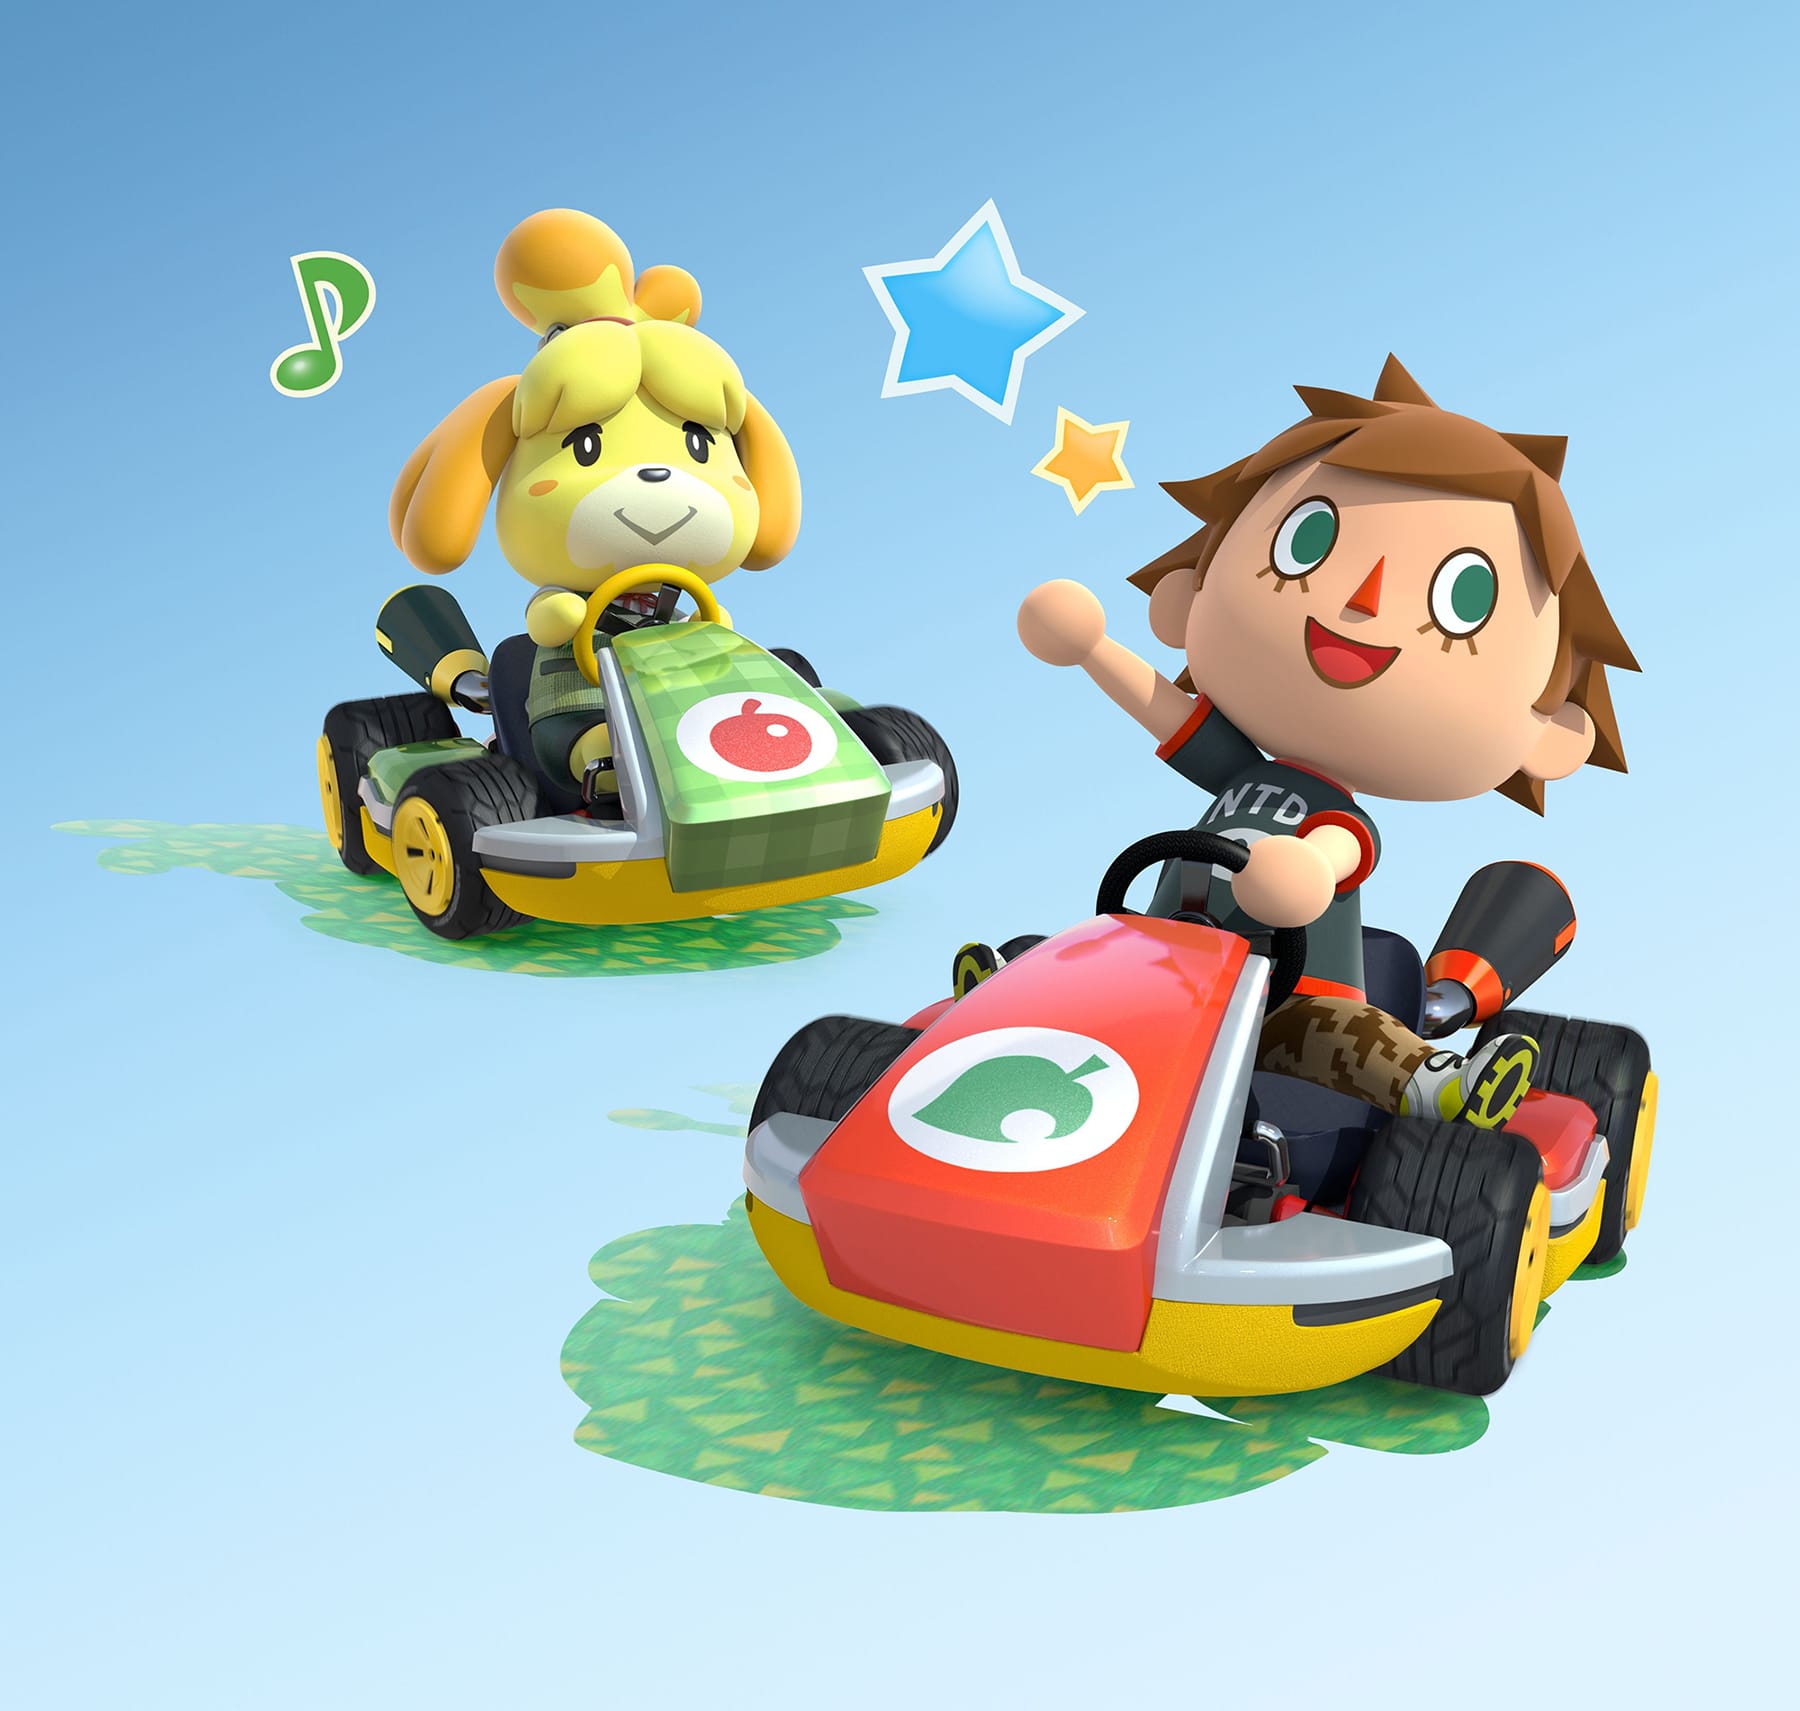 Mario Kart 8 Animal Crossing Villager and Isabelle Characters Artwork